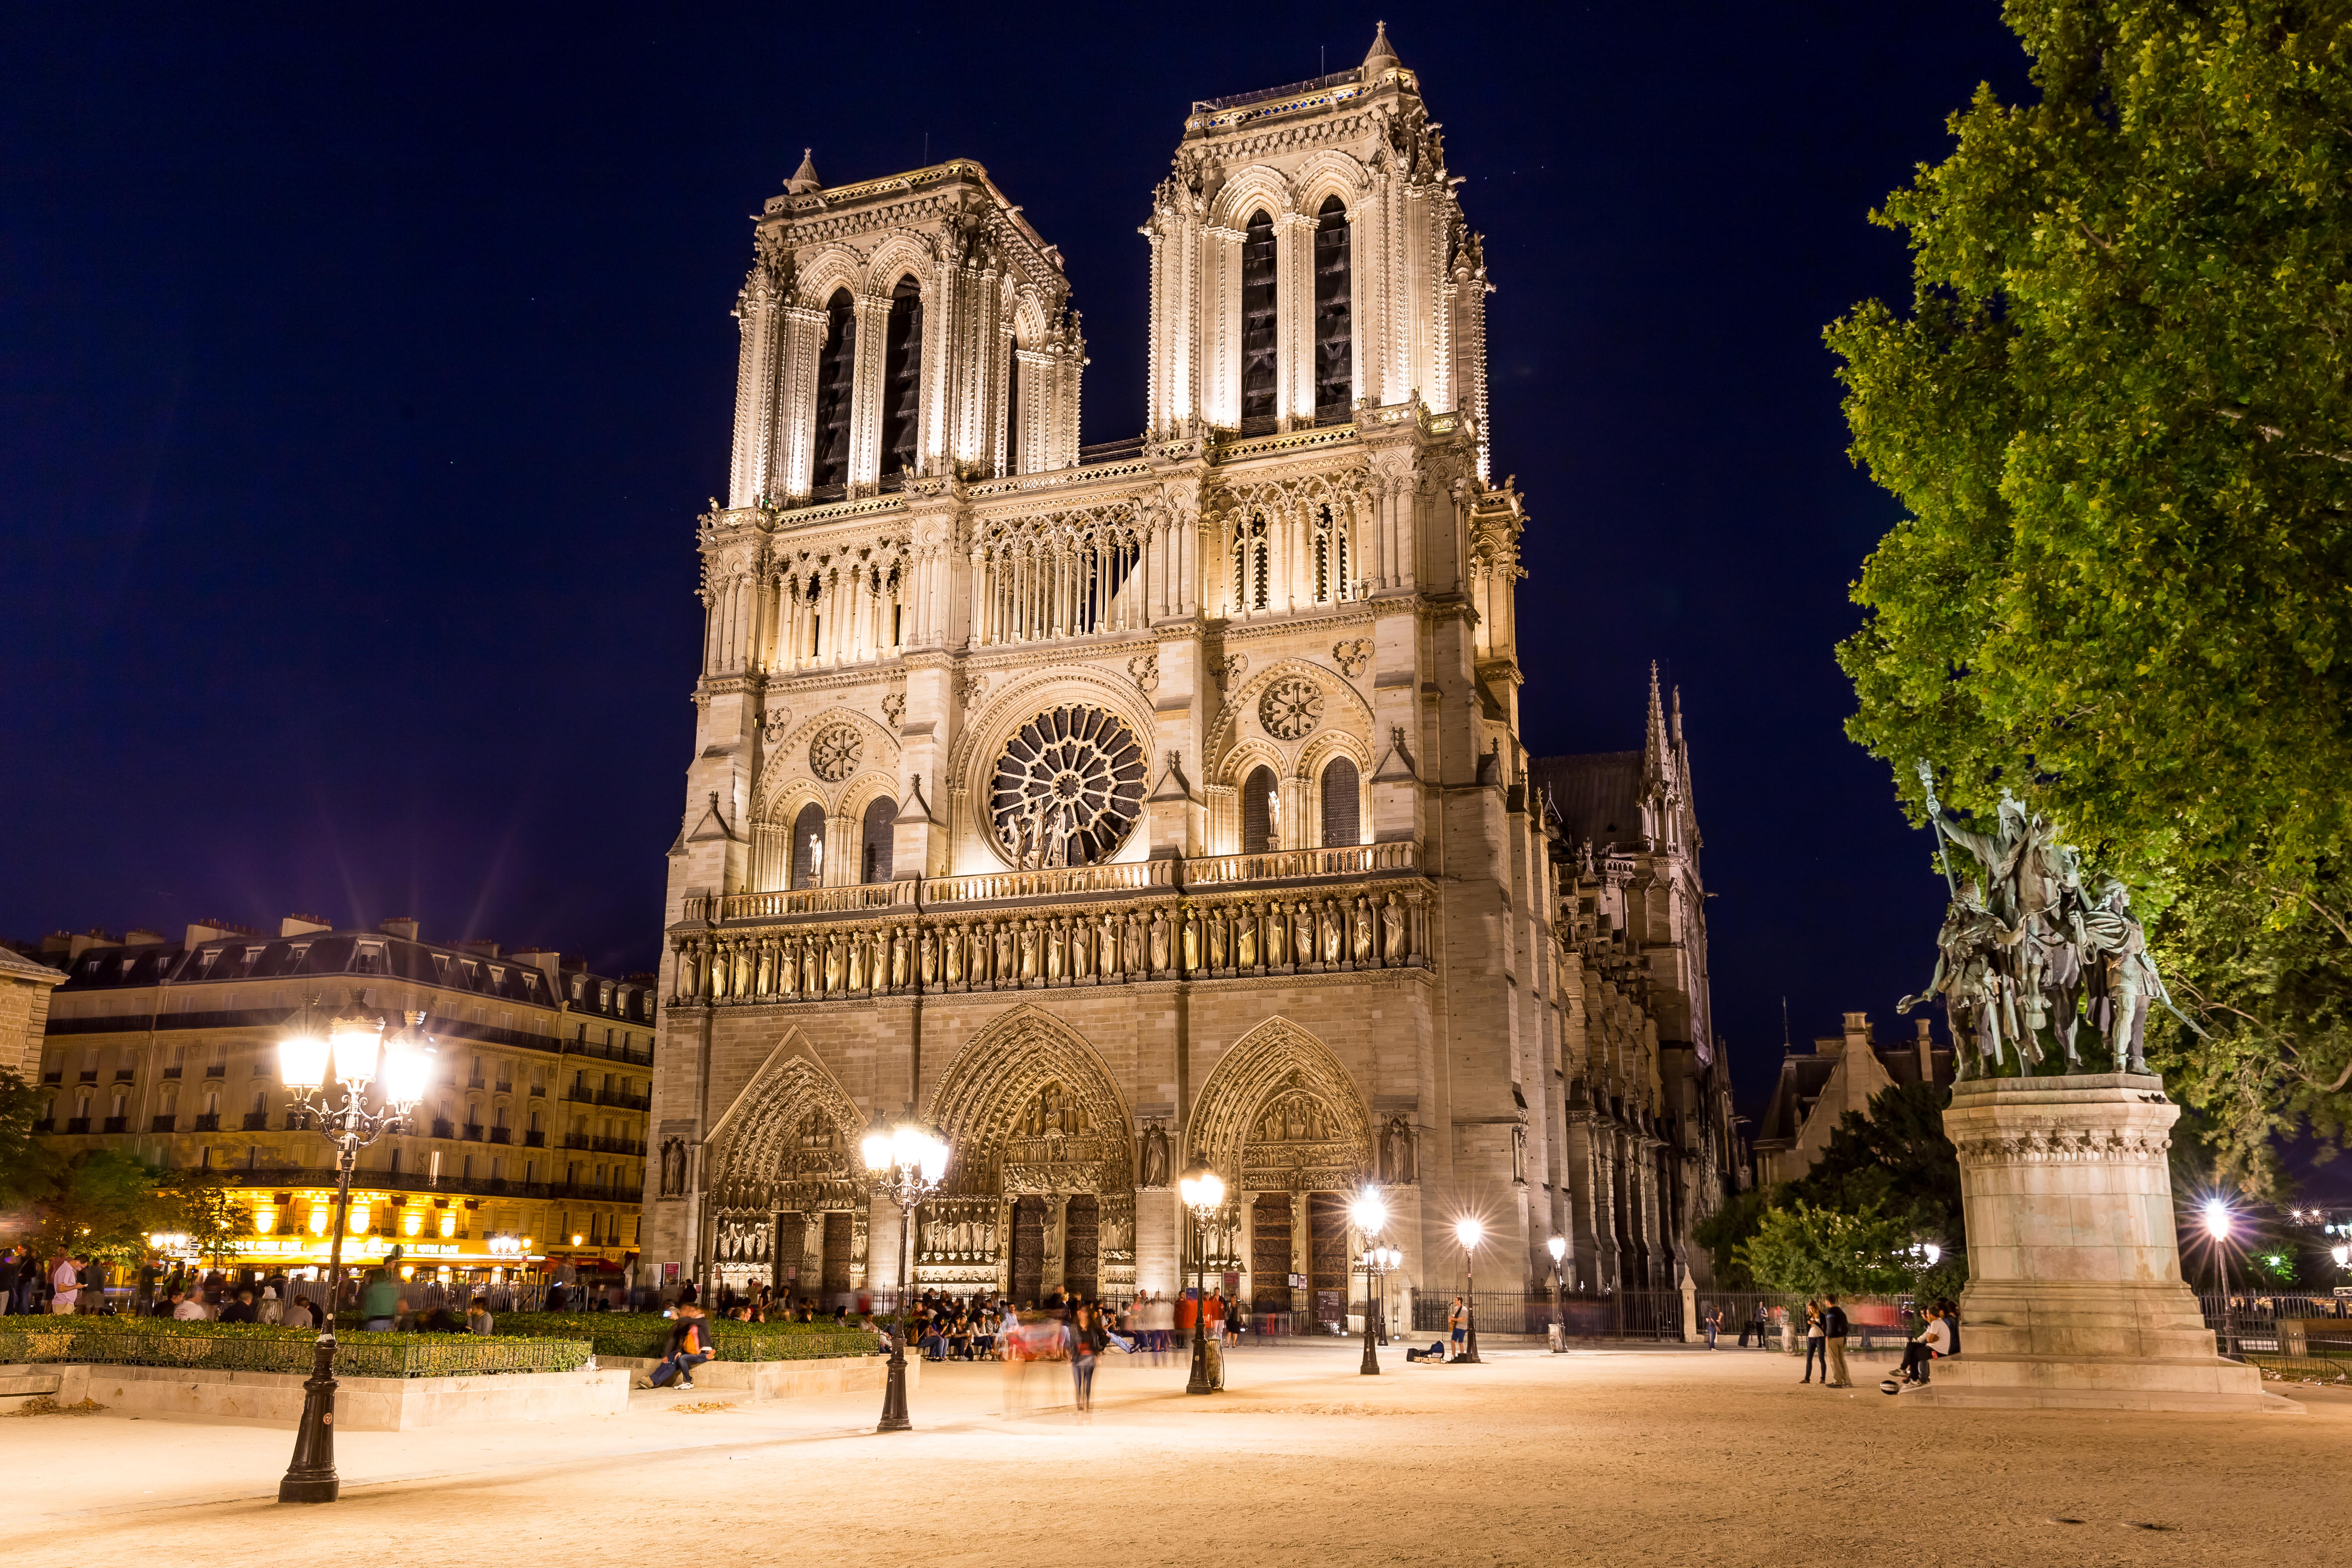 Notre Dame Towers